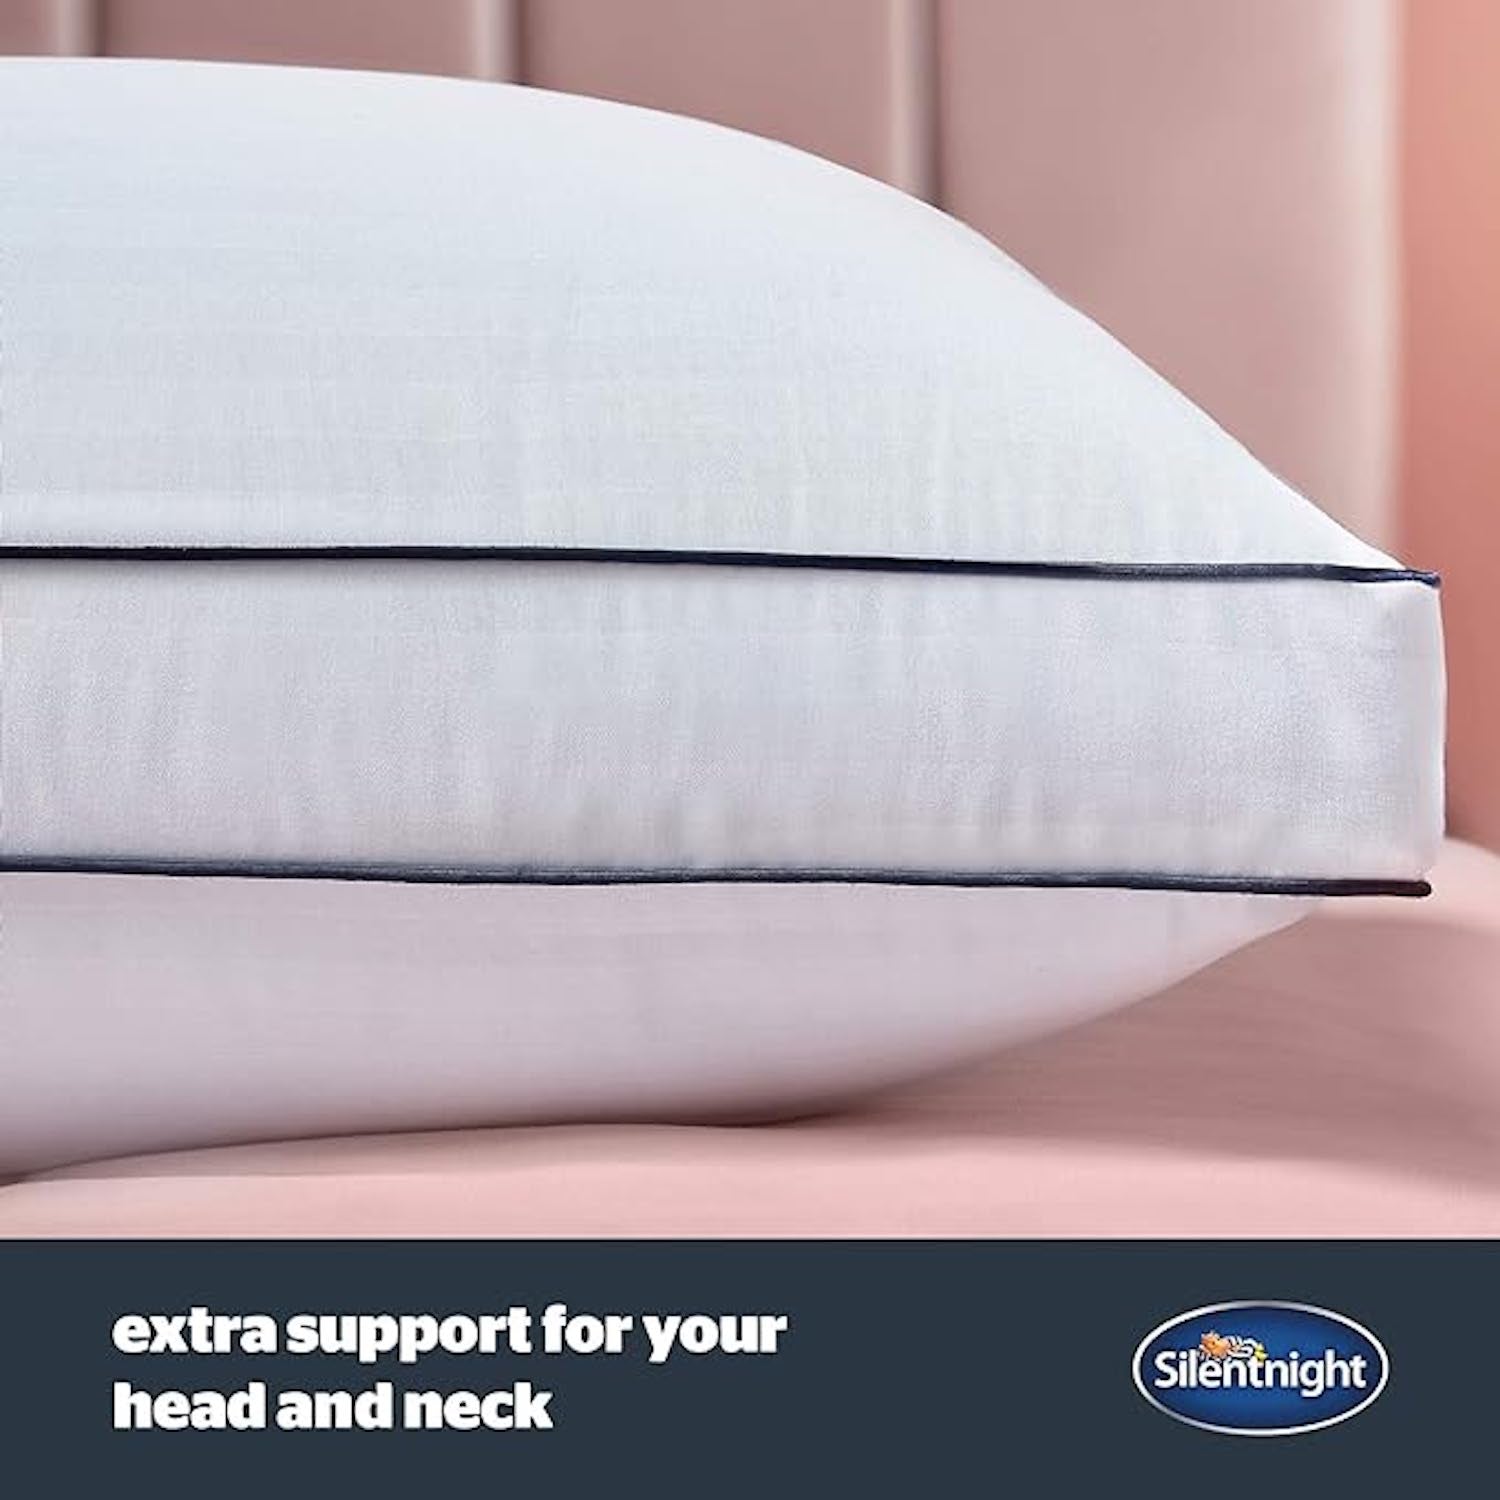 The Silentnight Hotel Collection Box Pillow is uniquely designed to give extra support for your head and neck 